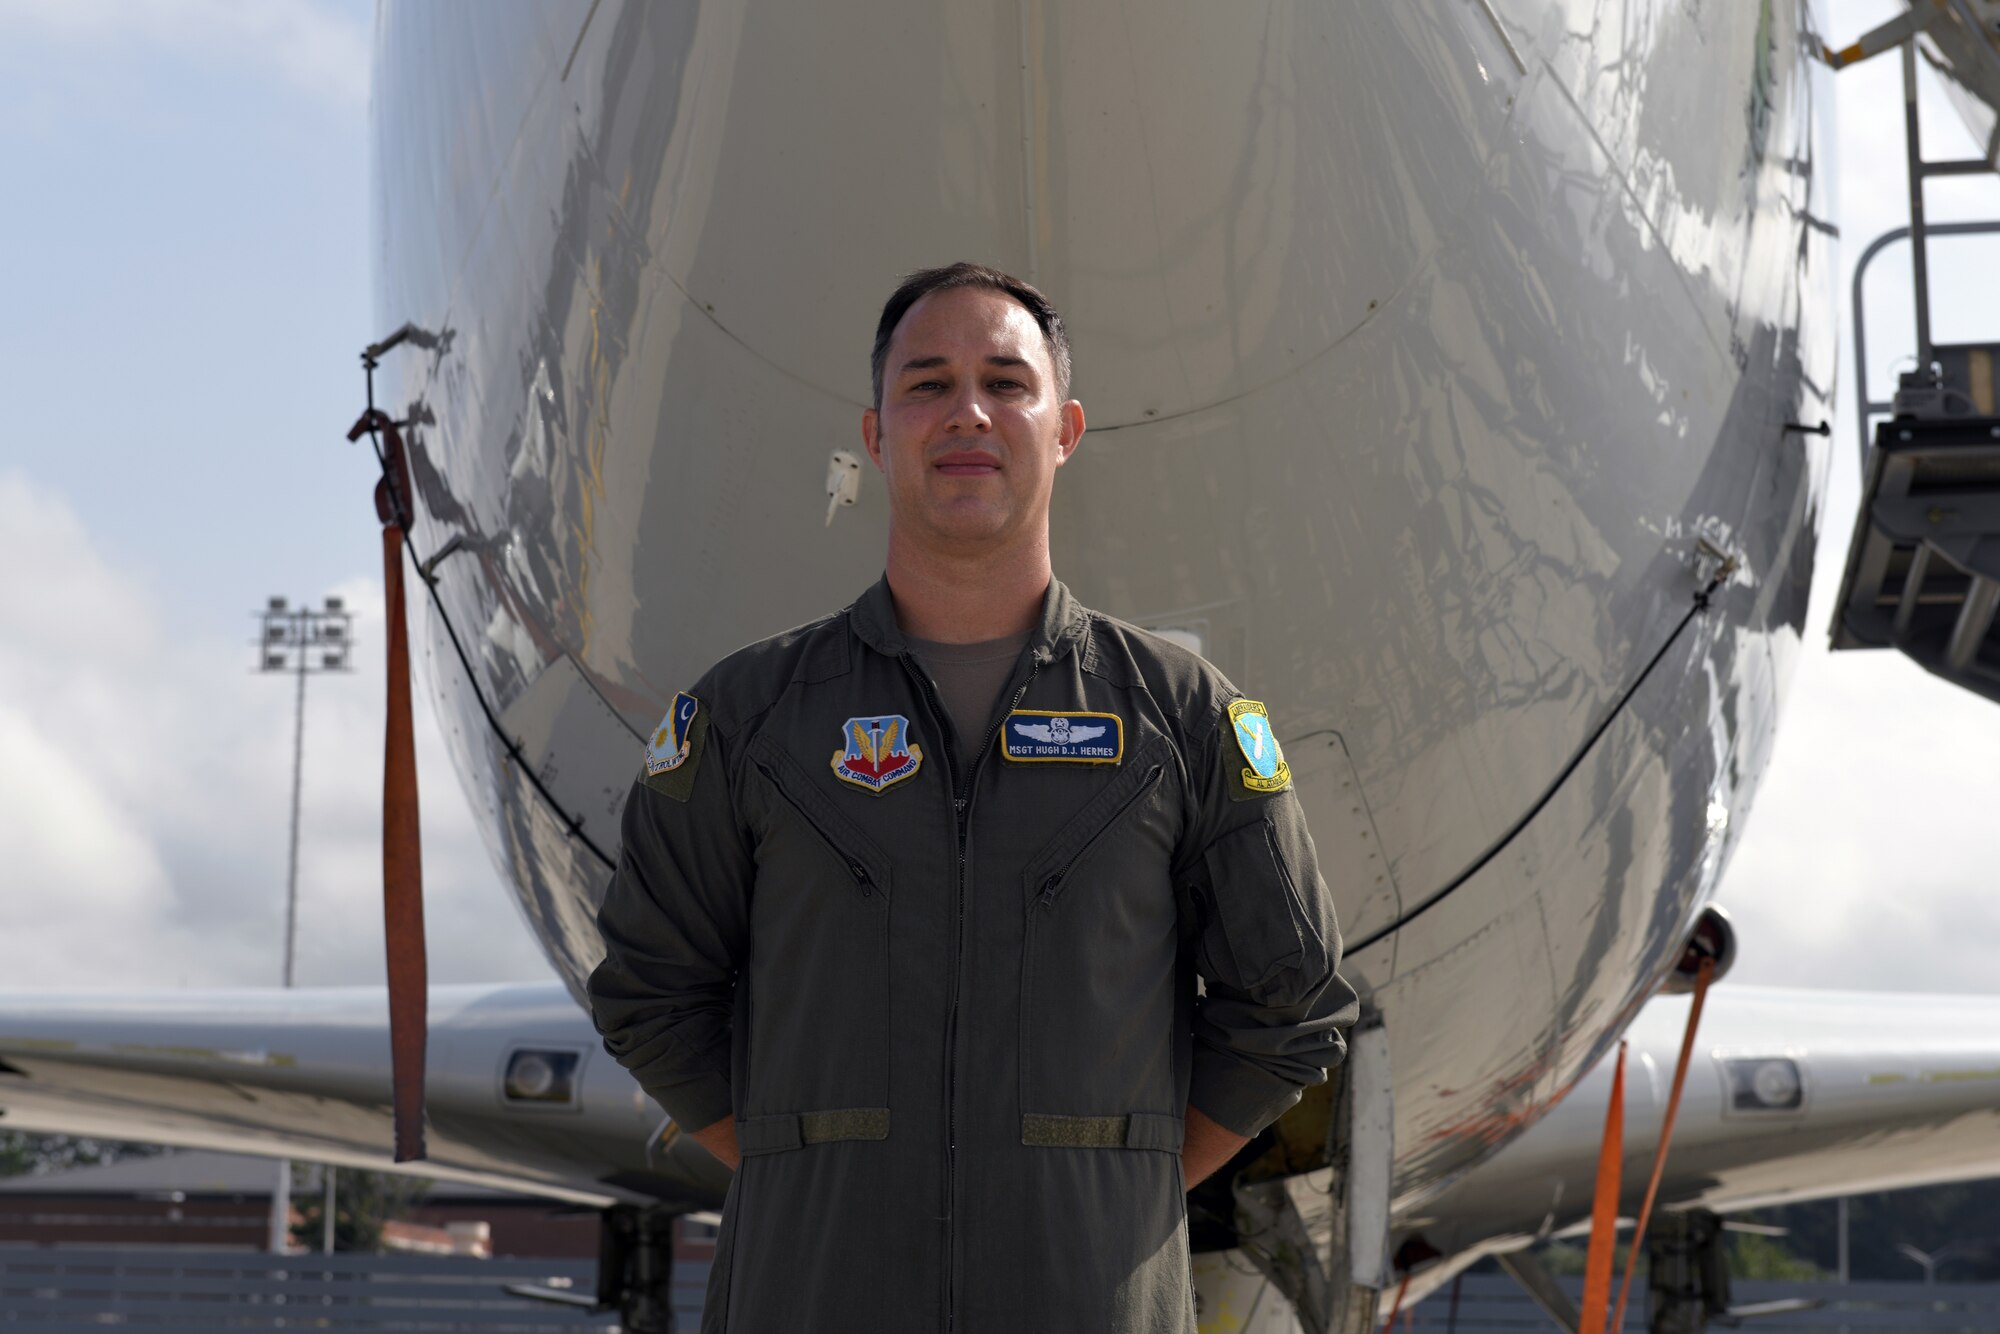 Photo shows Hermes standing in front of nose of plane.